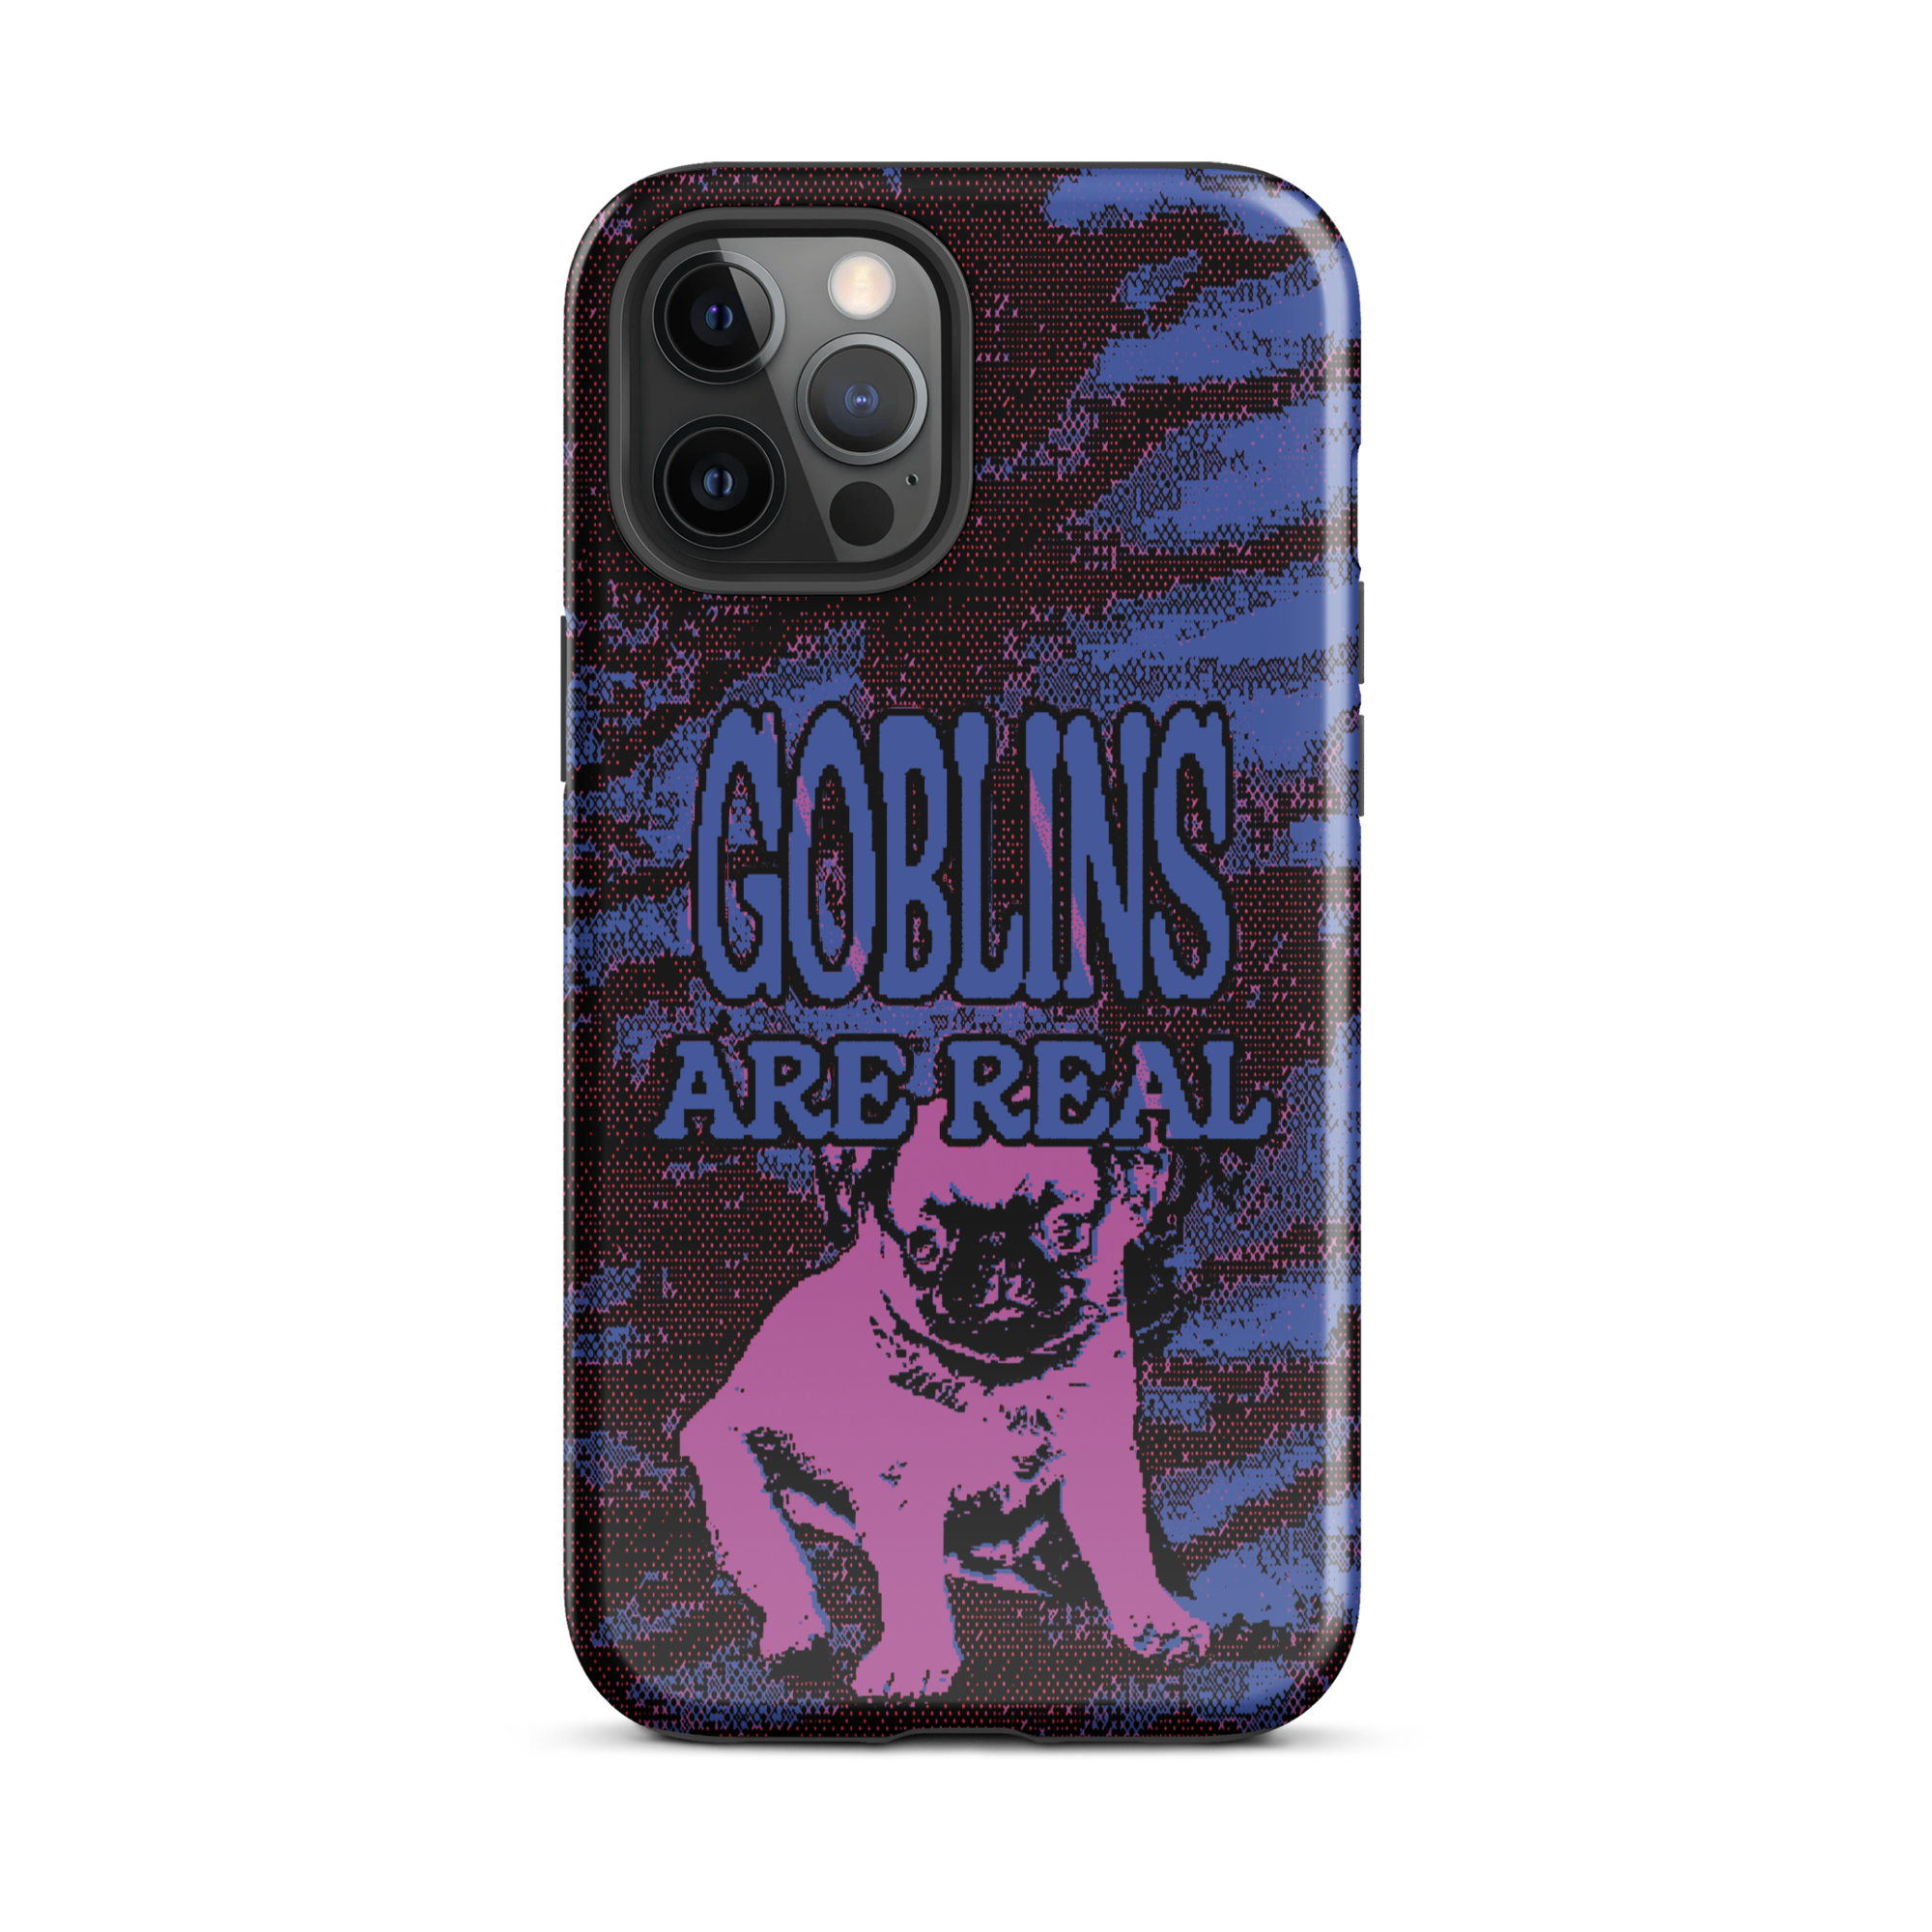 iphone tough case - goblins are real